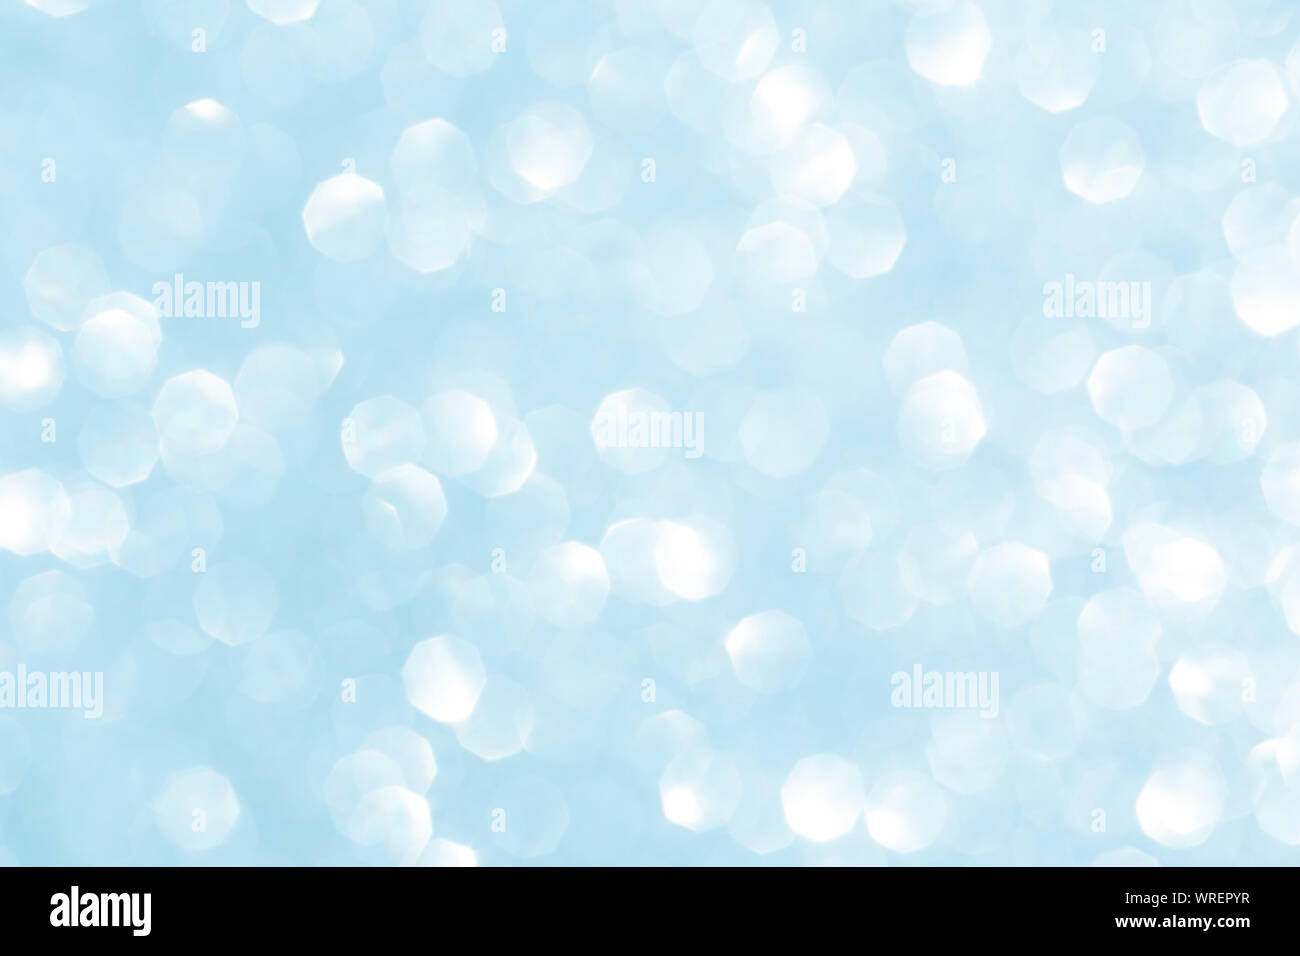 Light Blue Glitter Texture Abstract Background Stock Photo Picture And  Royalty Free Image Image 53534931